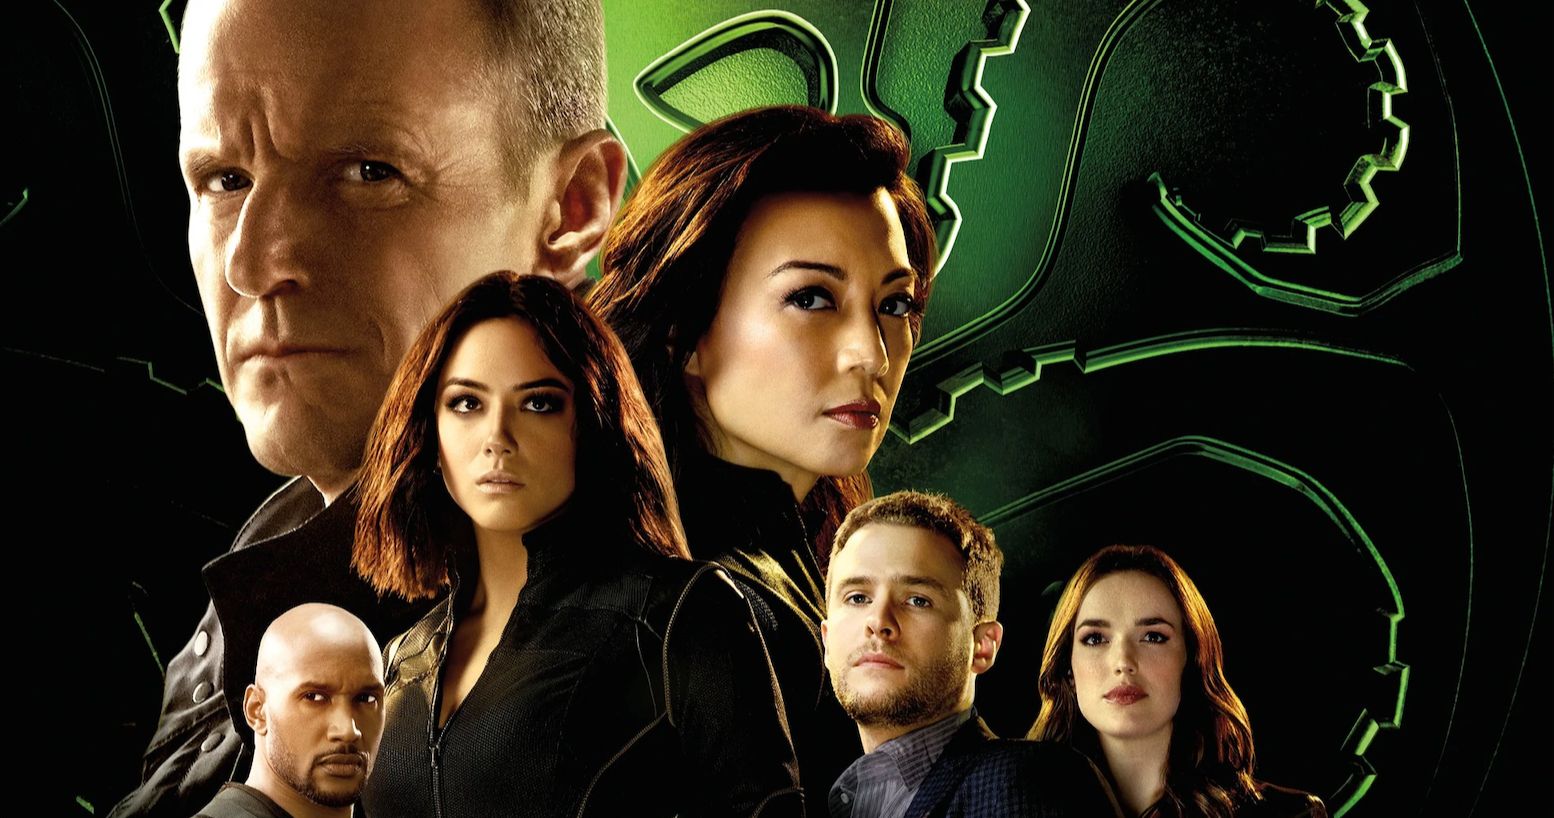 S.H.I.E.L.D. and Hydra Could Always Return in the MCU Teases Kevin Feige